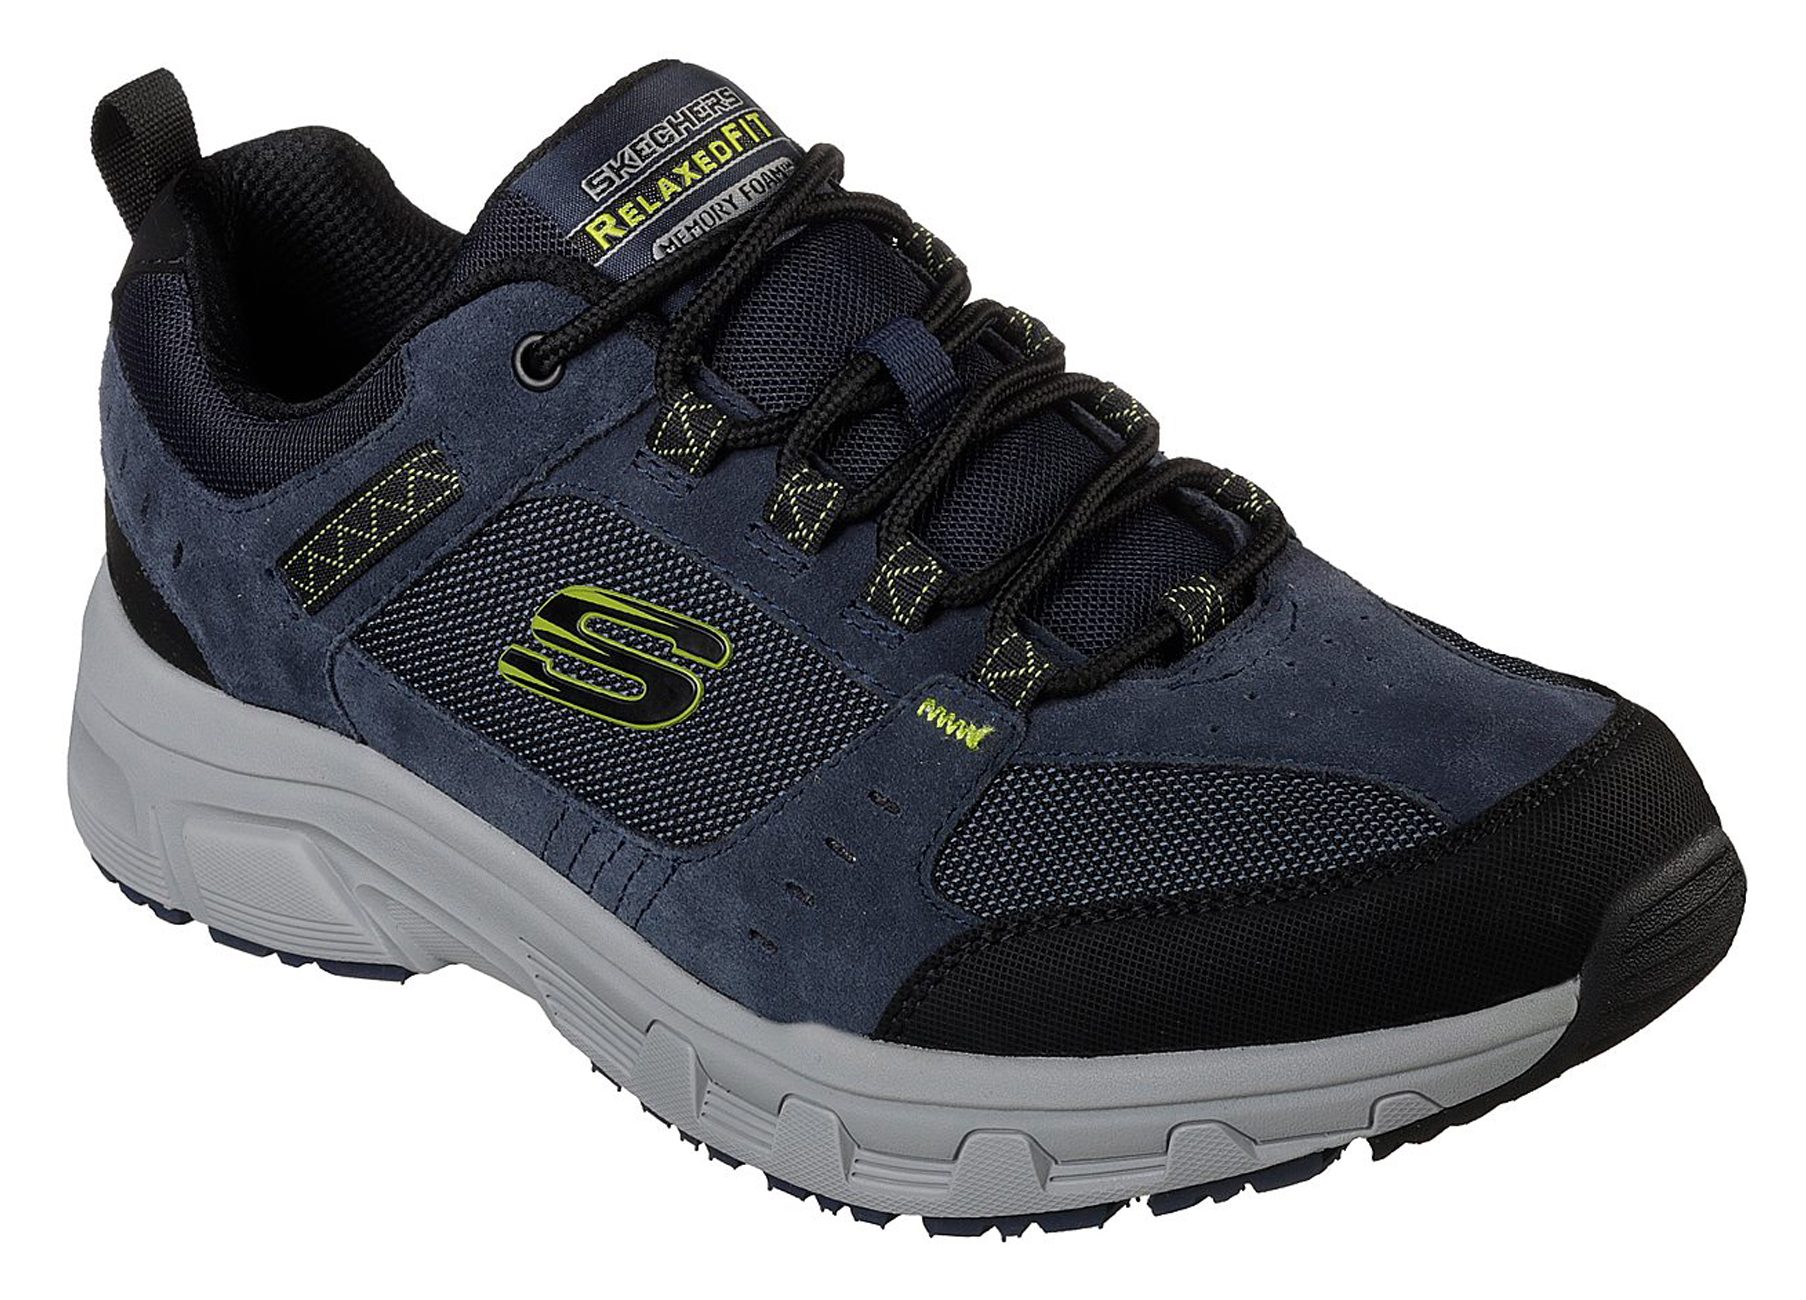 Skechers Relaxed Fit: Oak Canyon Navy / Lime 51893 NVLM - Trainers ...